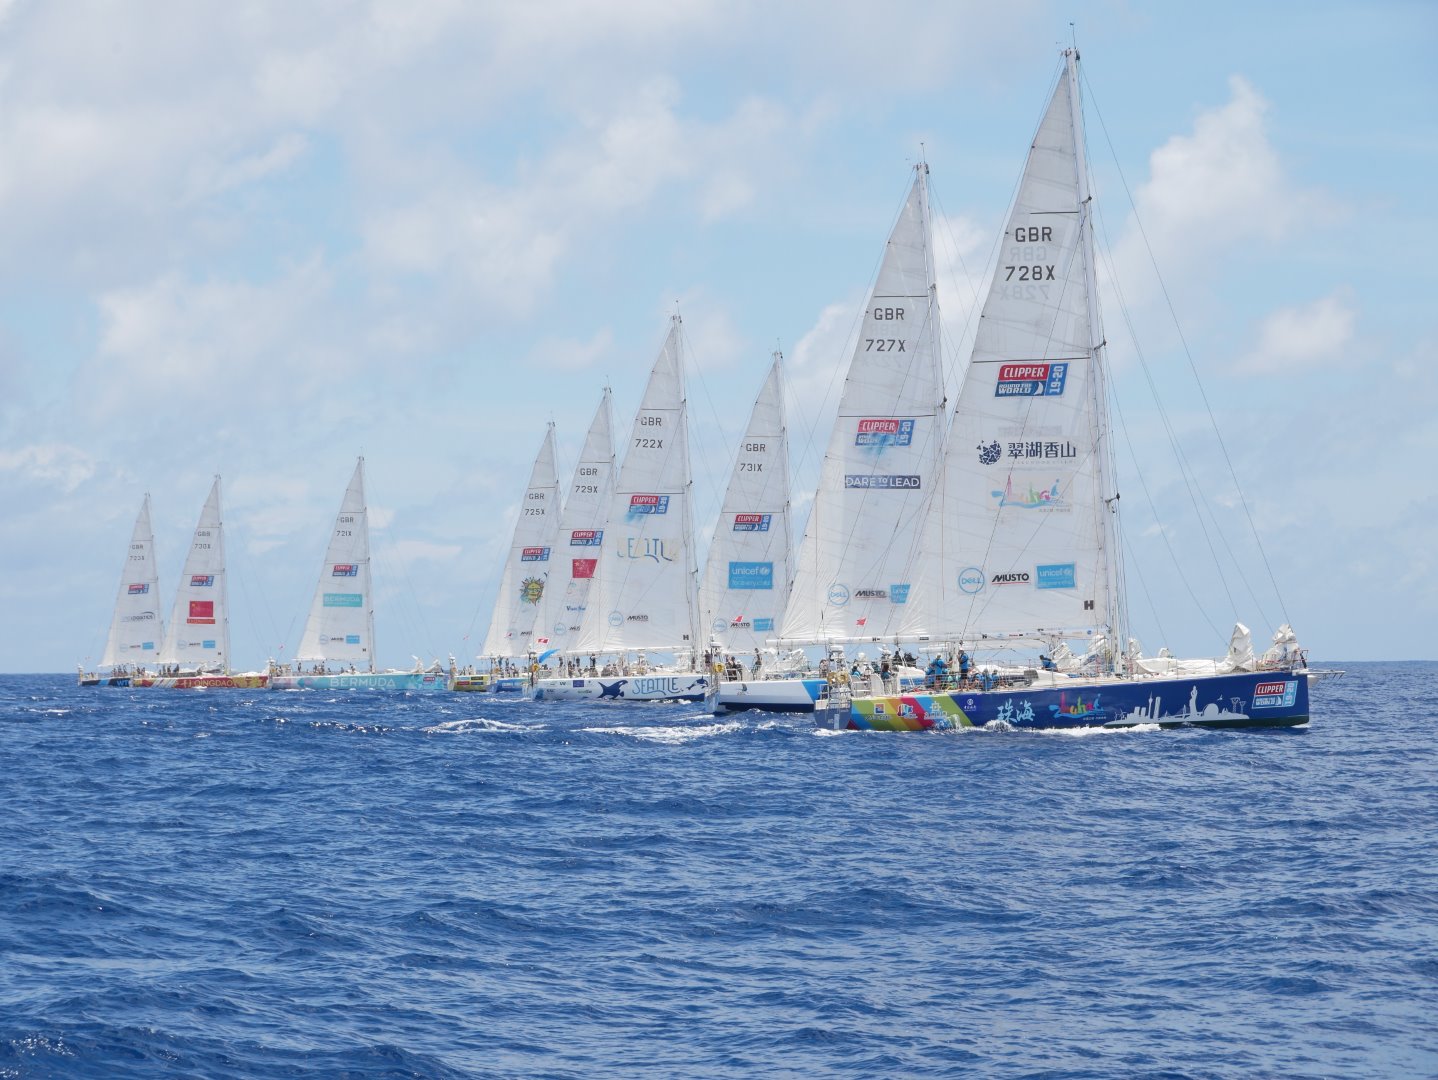 Clipper 70s start to line up for Race 12: Go To Bermuda